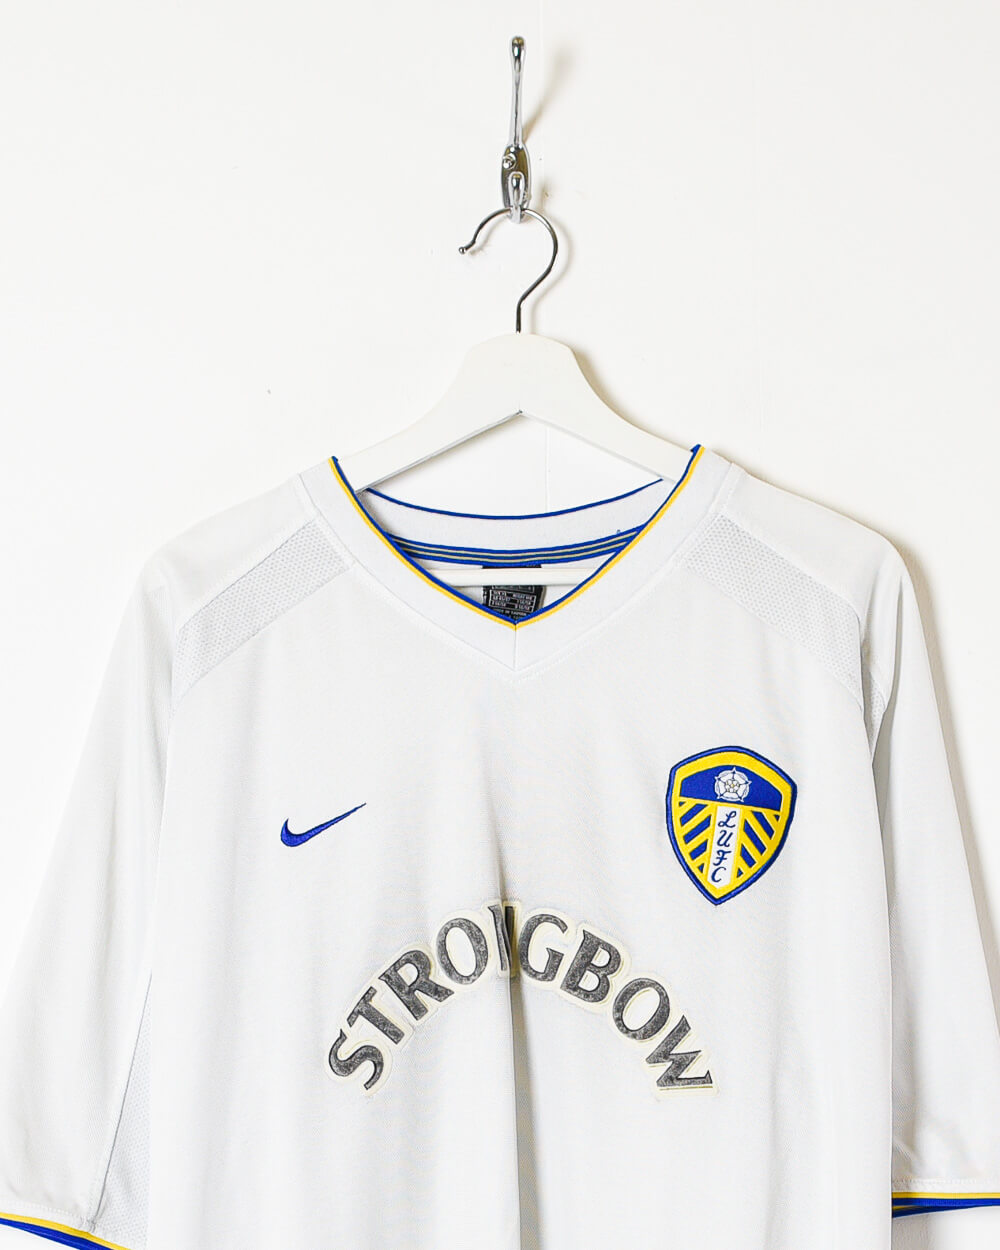 Retro Leeds United Home Jersey 2000/01 By Nike